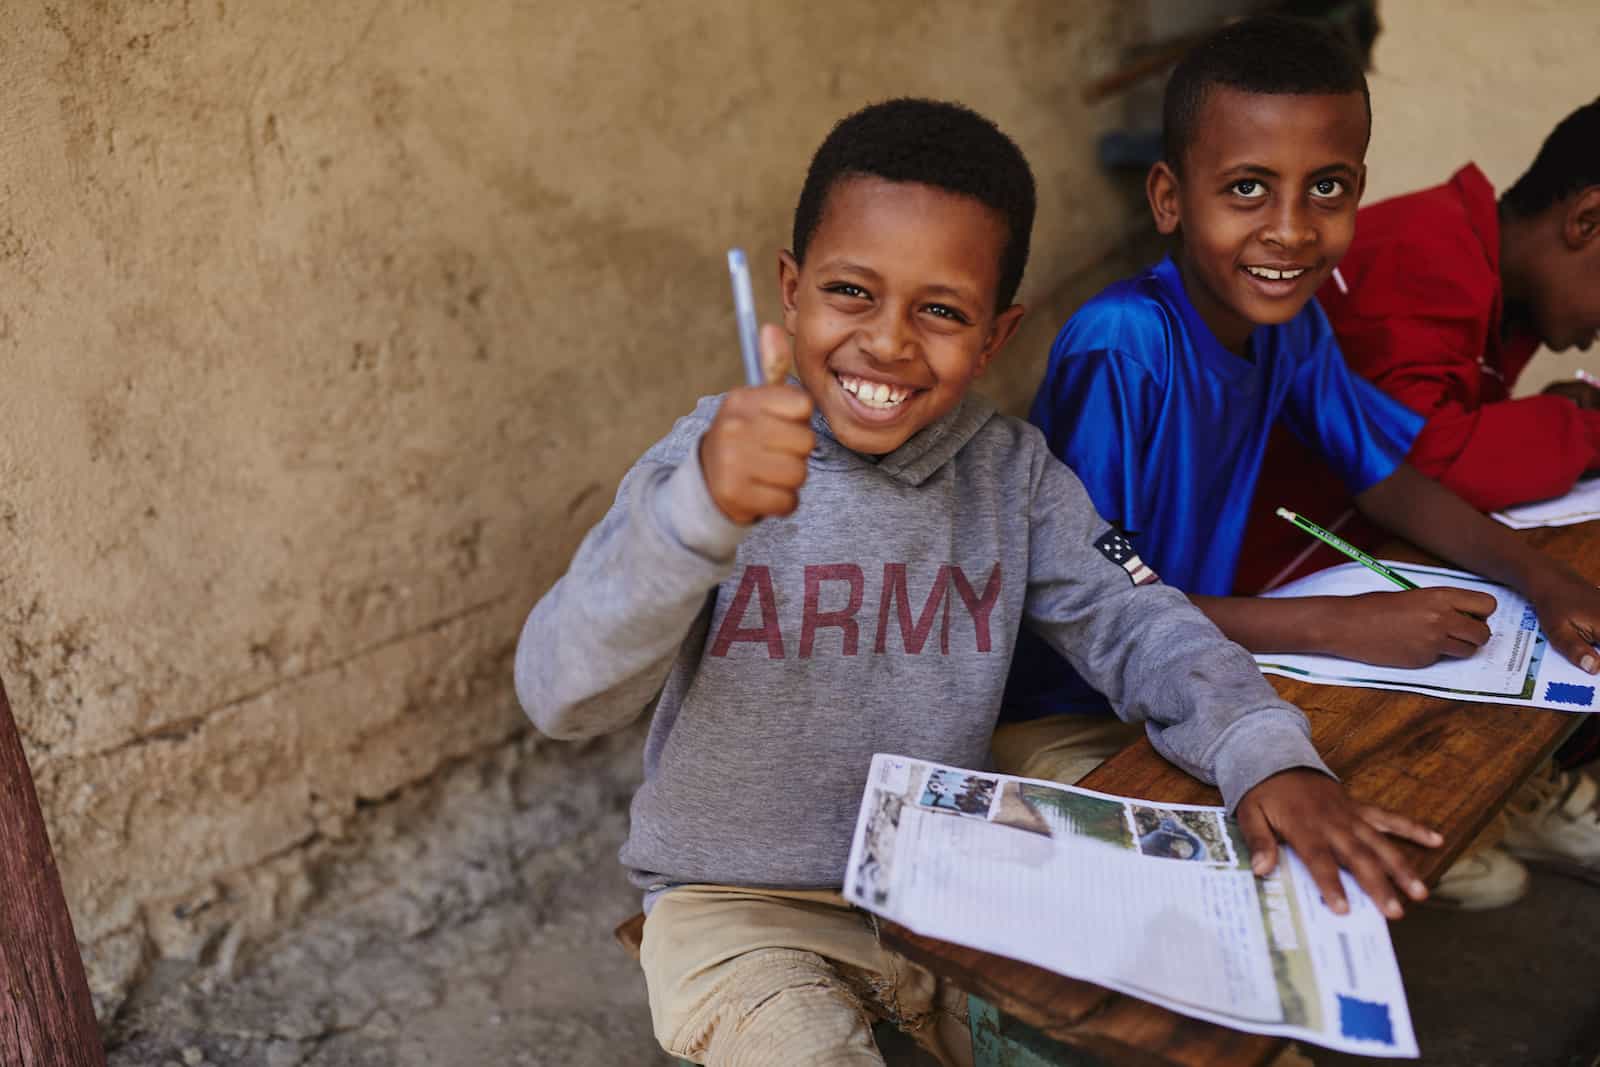 A boy wearing a grey sweatshirt that says "Army" gives the thumbs up sign while holding a pen and paper.